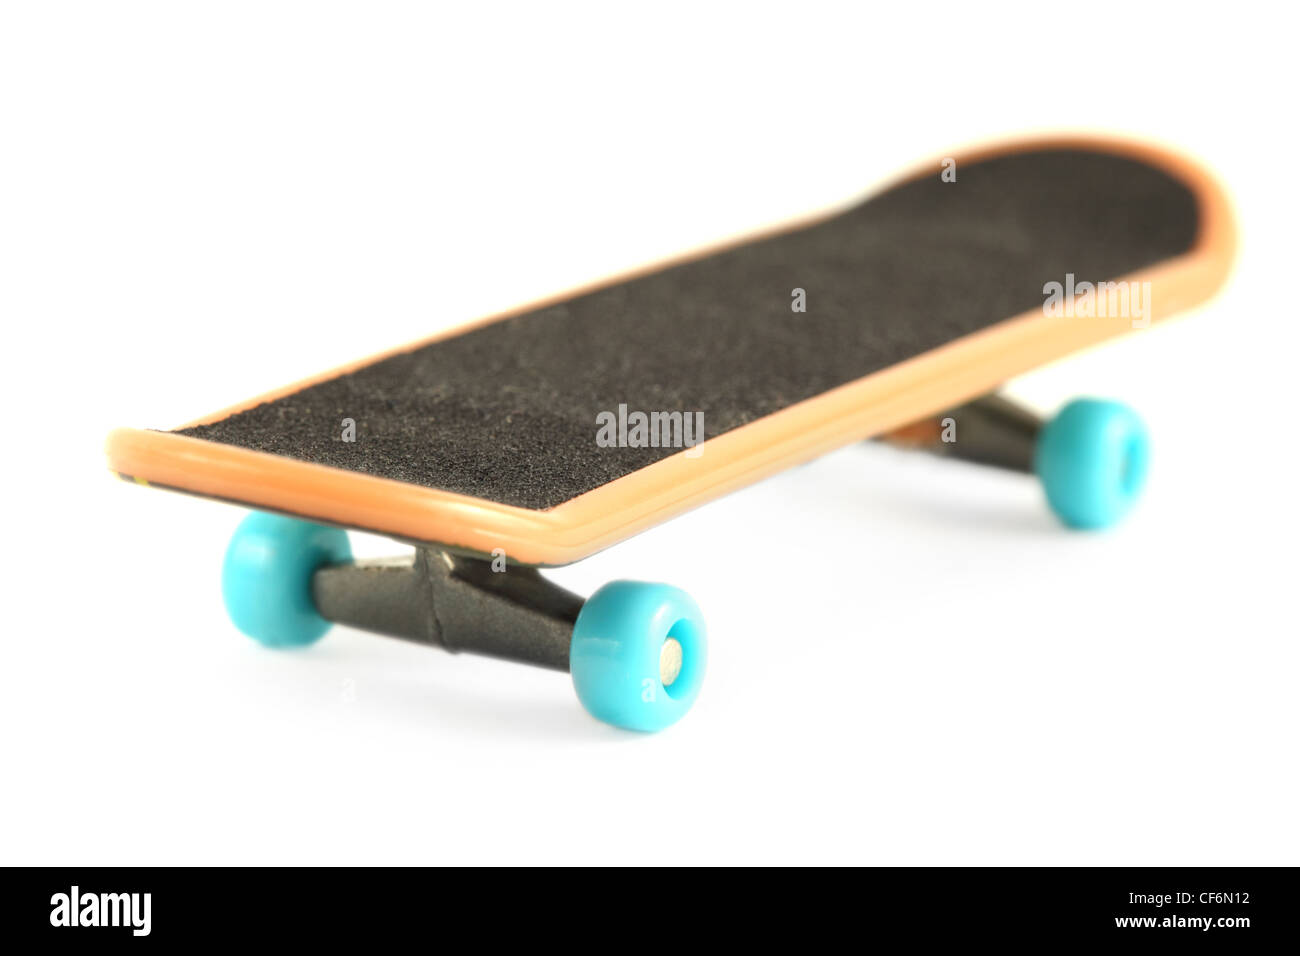 Black skateboard with yellow edge and blue wheel isolated on white Stock Photo